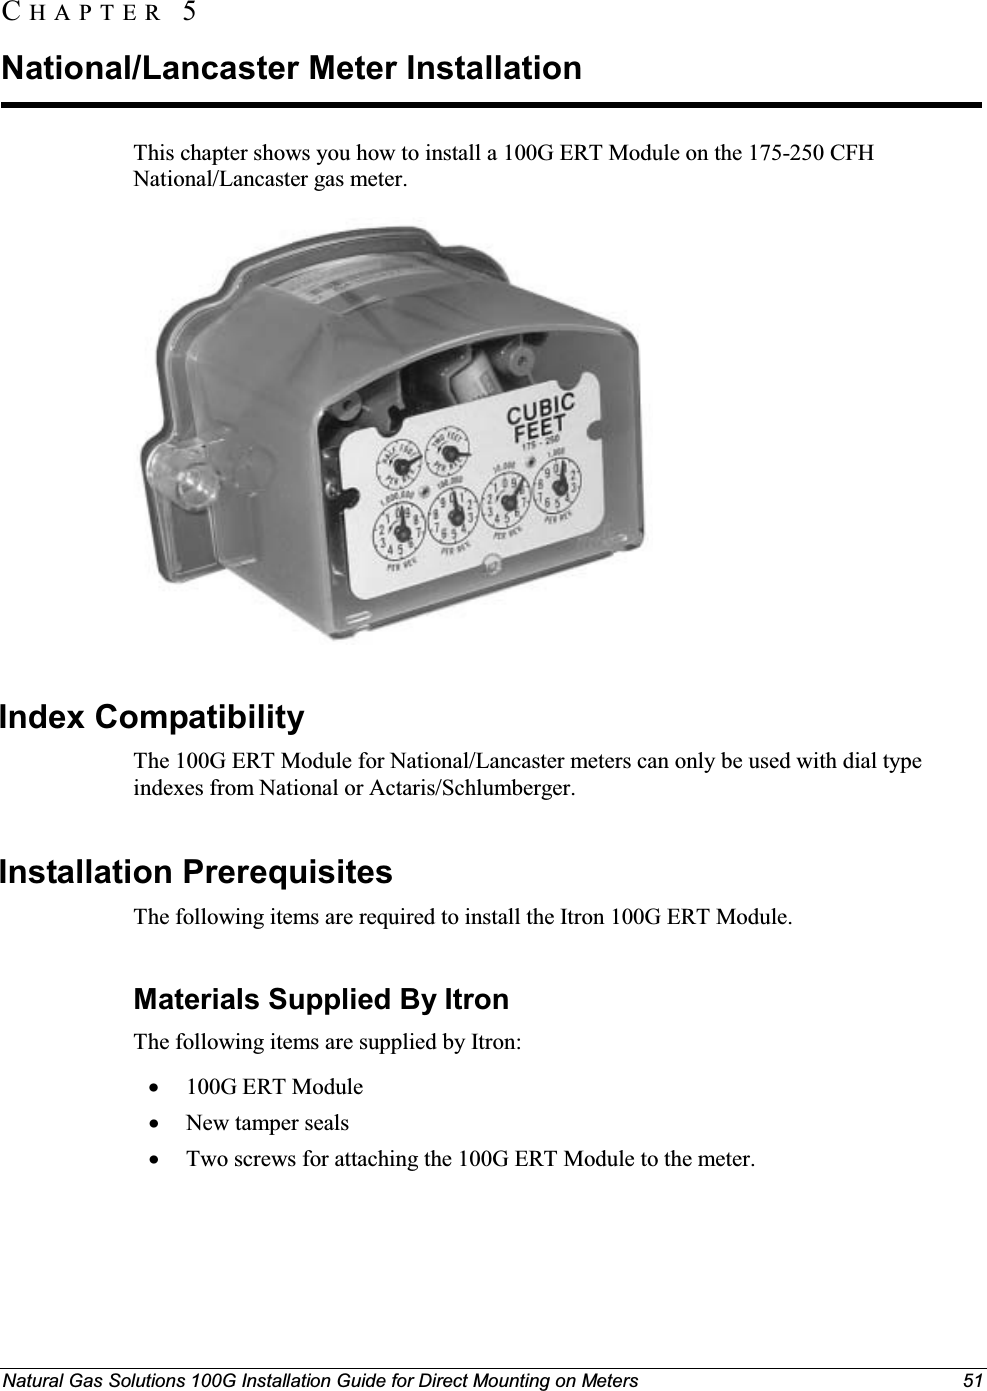 Natural Gas Solutions 100G Installation Guide for Direct Mounting on Meters 51This chapter shows you how to install a 100G ERT Module on the 175-250 CFH National/Lancaster gas meter.Index CompatibilityThe 100G ERT Module for National/Lancaster meters can only be used with dial type indexes from National or Actaris/Schlumberger.Installation PrerequisitesThe following items are required to install the Itron 100G ERT Module. Materials Supplied By ItronThe following items are supplied by Itron: x100G ERT ModulexNew tamper sealsxTwo screws for attaching the 100G ERT Module to the meter.CH A P T E R  5National/Lancaster Meter Installation 